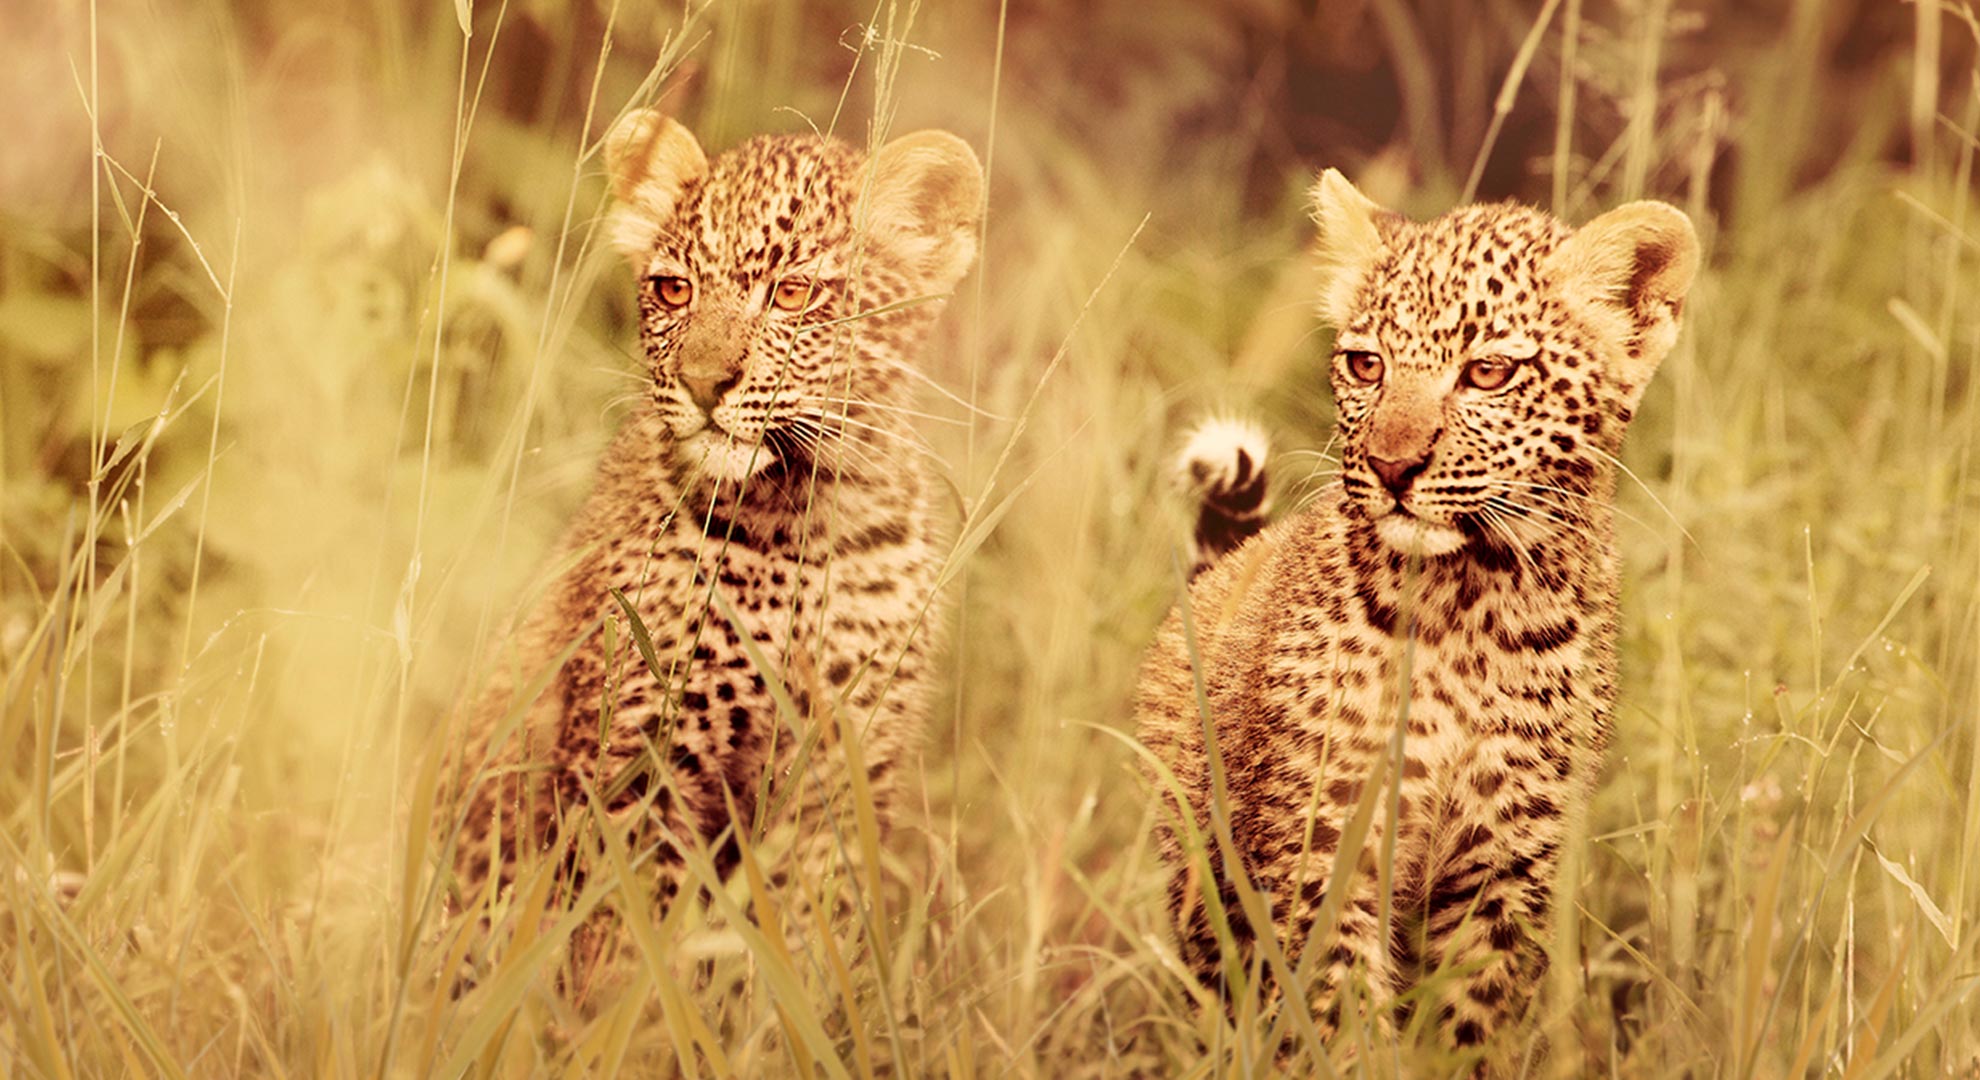 Image Slider No: 2 Embark on a Thrilling Big Five Safari in Tanzania with Lindo Travel & Tours